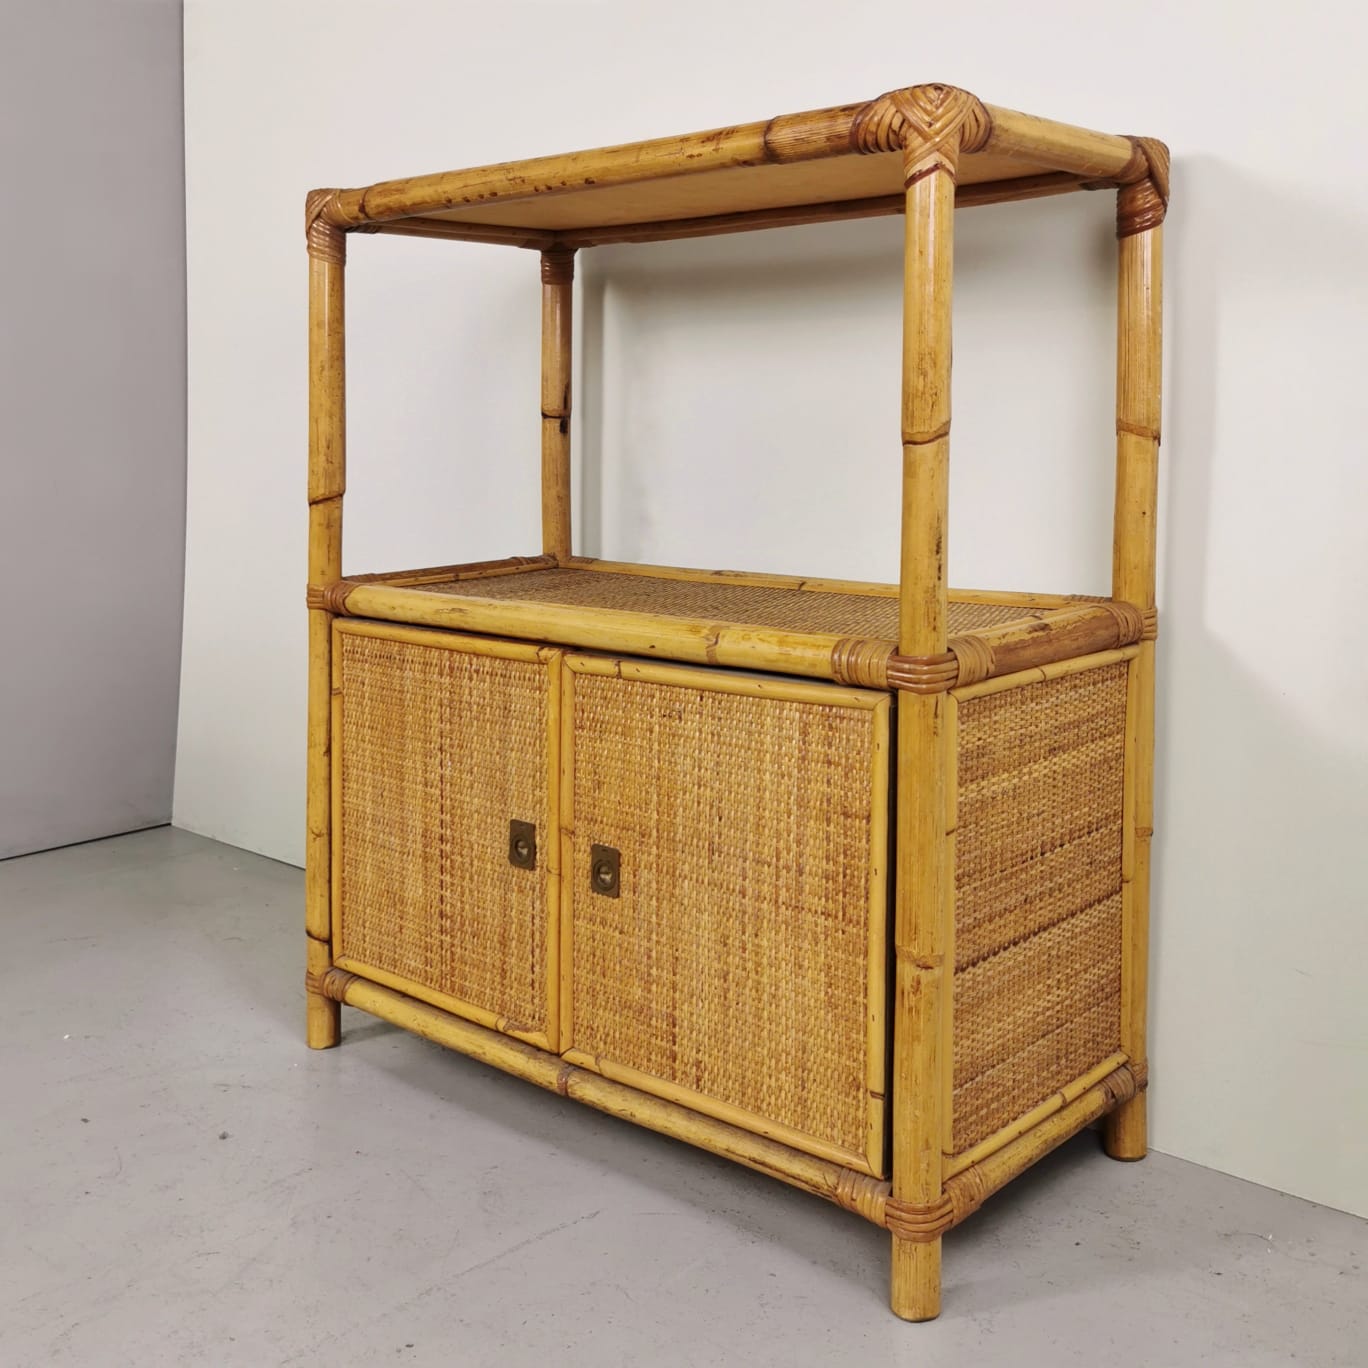 Furniture and Backsplashes in Bamboo / Wicker Dal Vera from the 70s